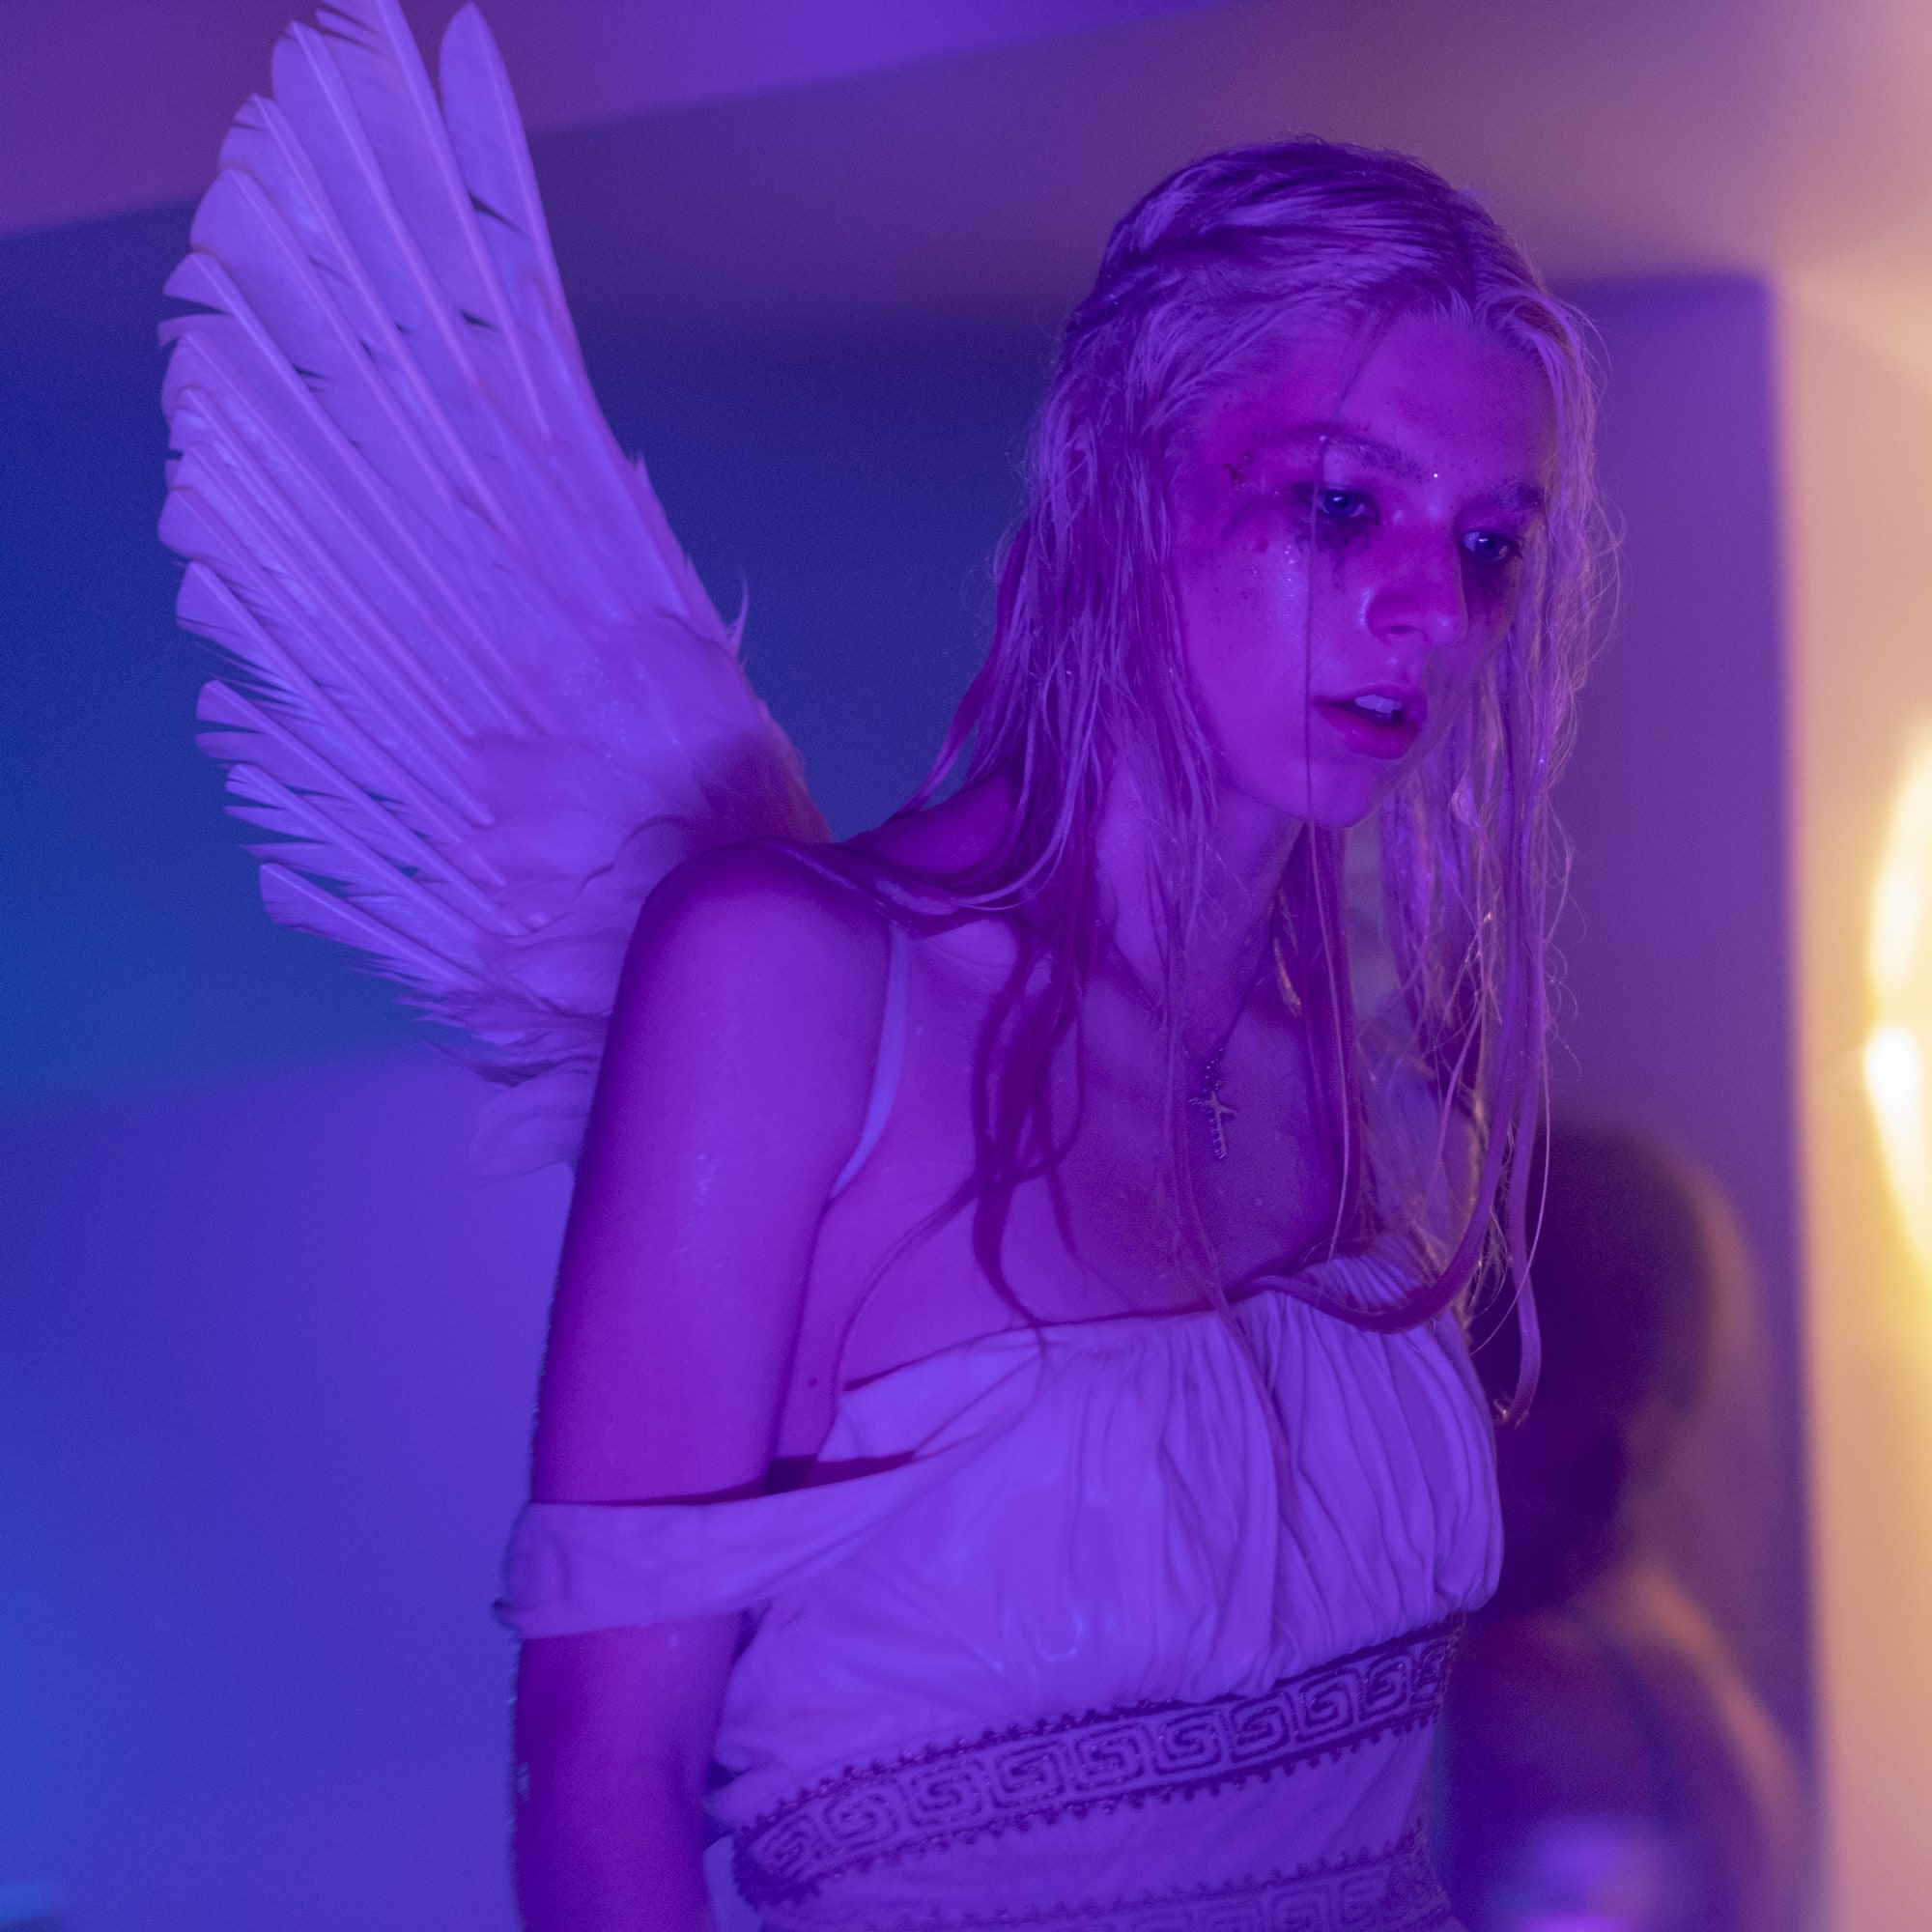 What Trans Teens Are Saying About Jules on 'Euphoria'